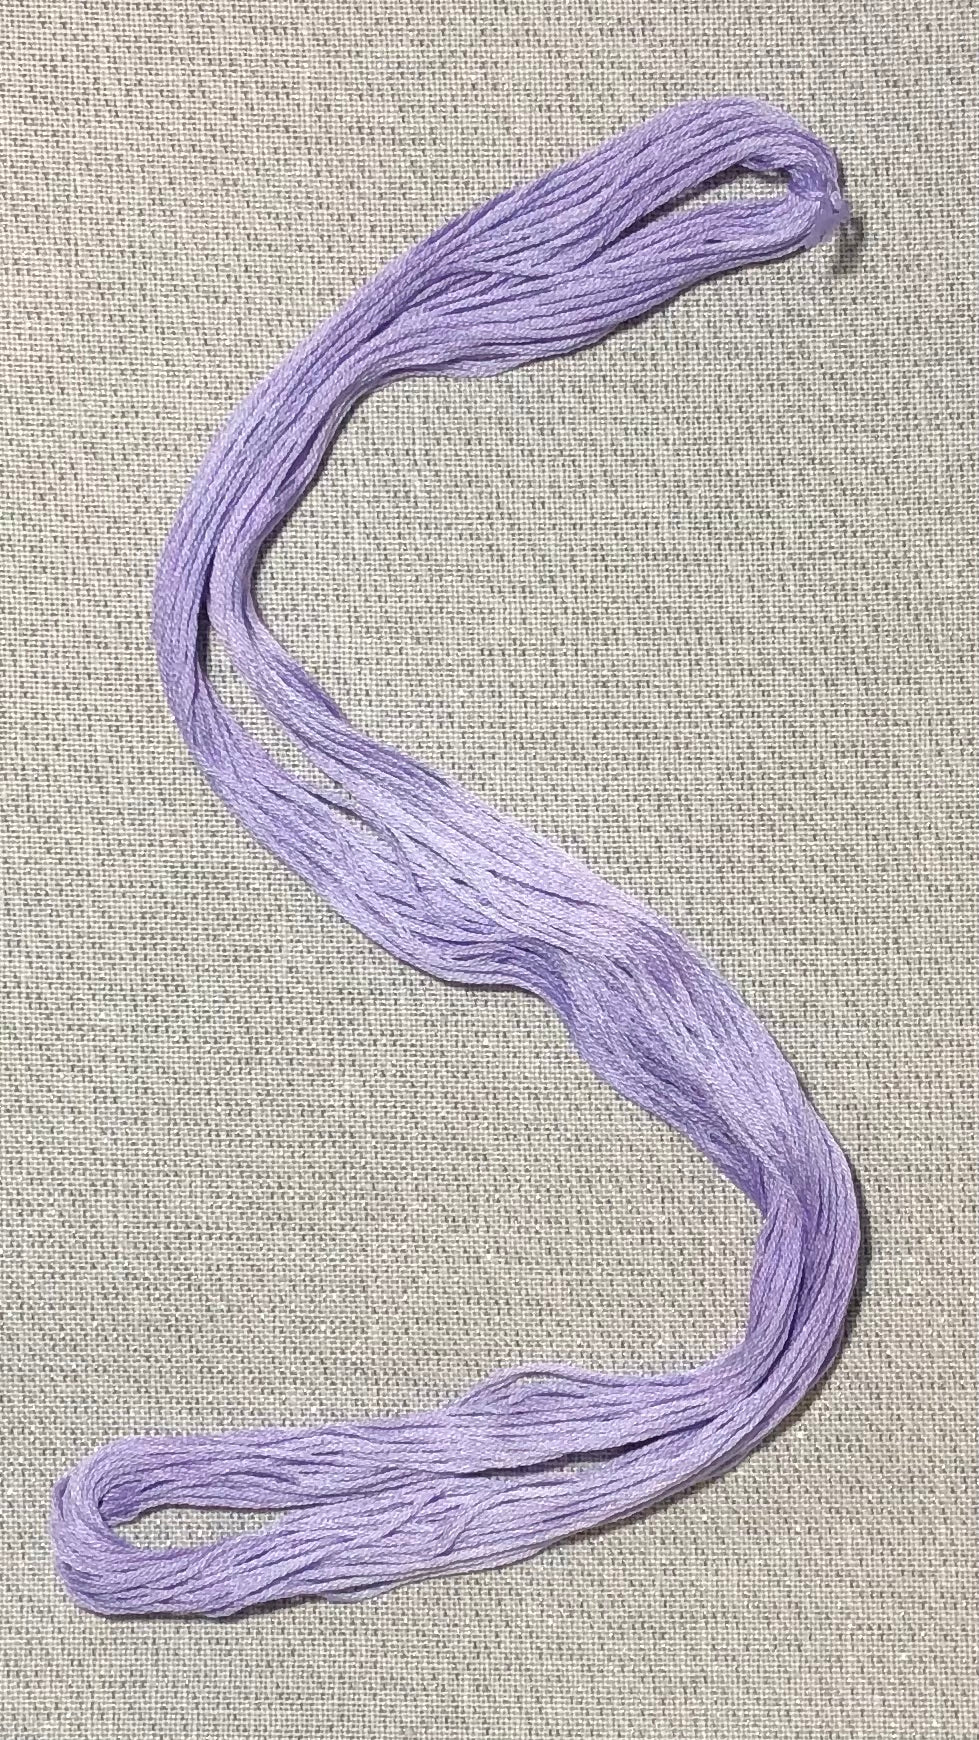 Cotton Floss - February FOTM - Dyeing for Cross Stitch